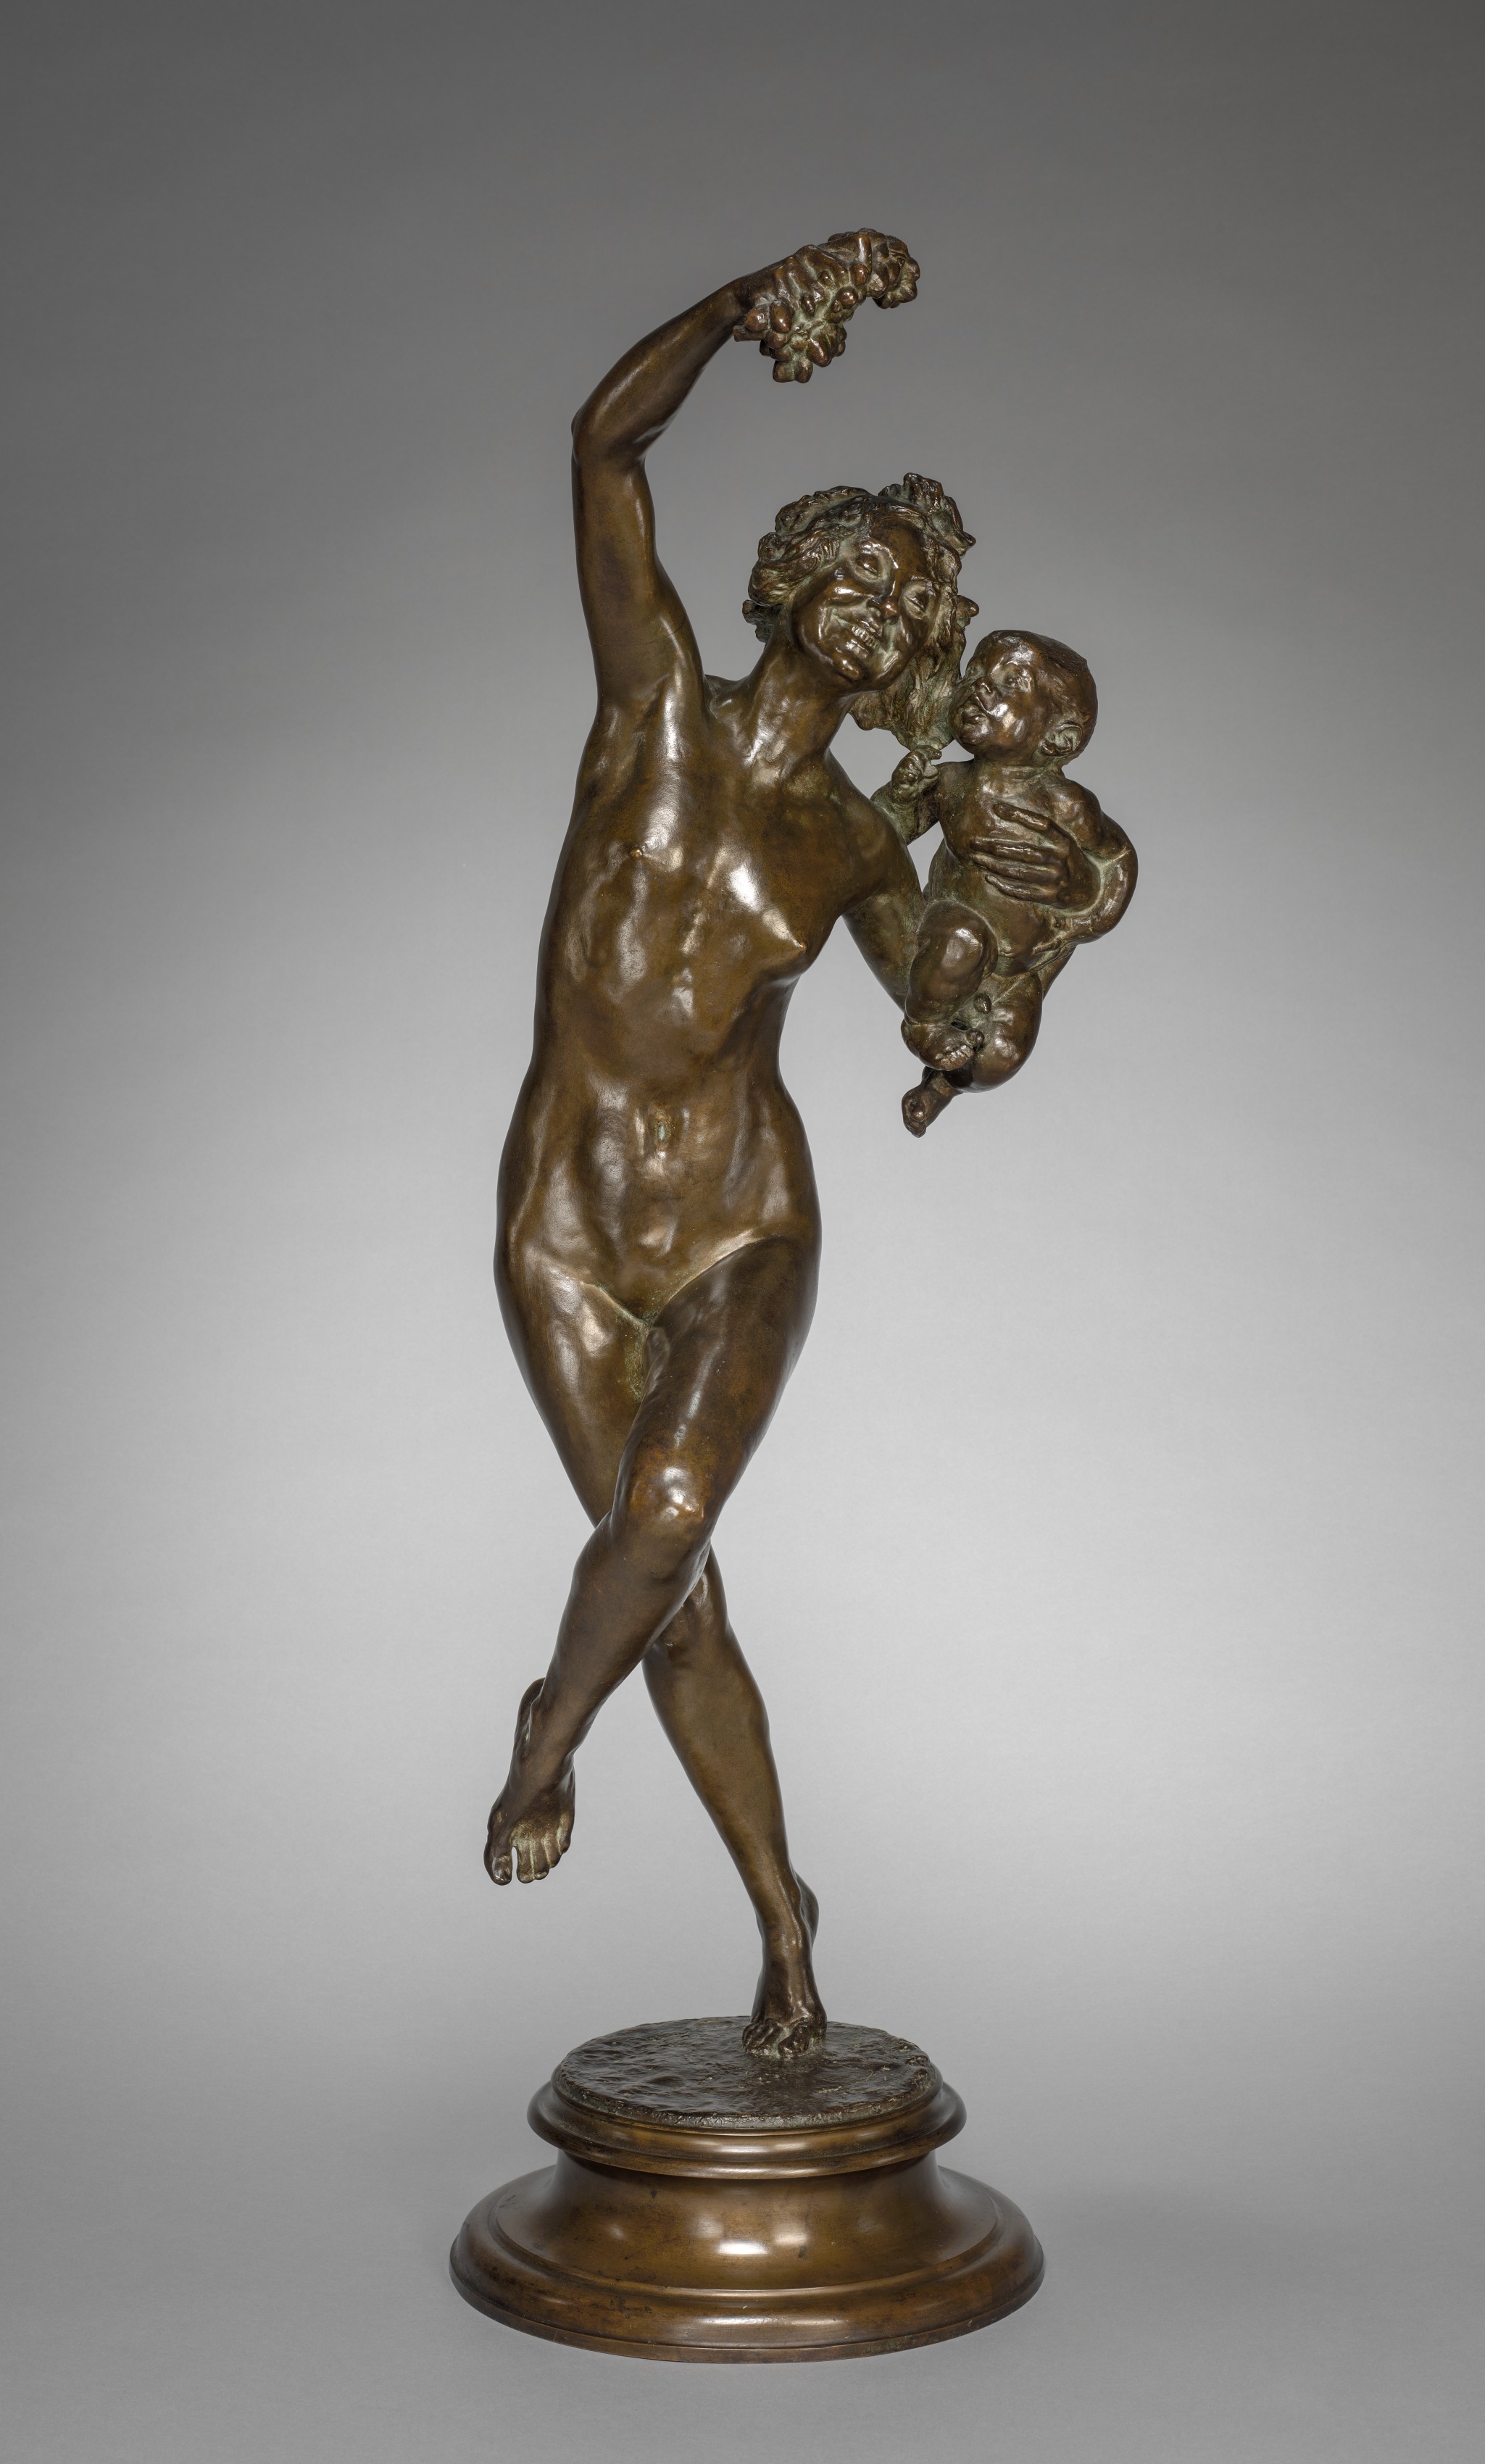 Bacchante and Infant Faun